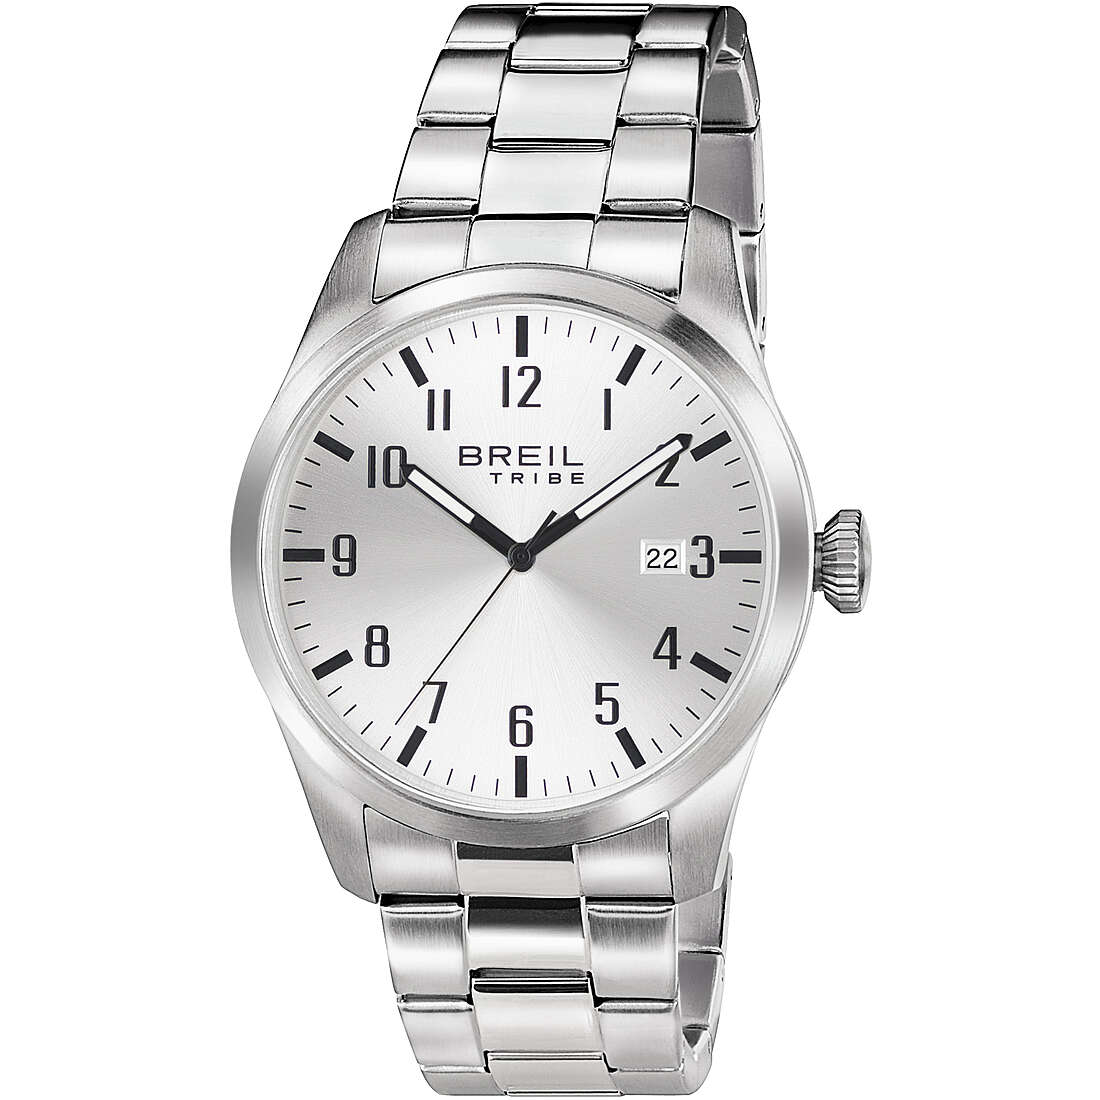 only time watch Steel Silver dial man Classic Elegance Extension EW0231